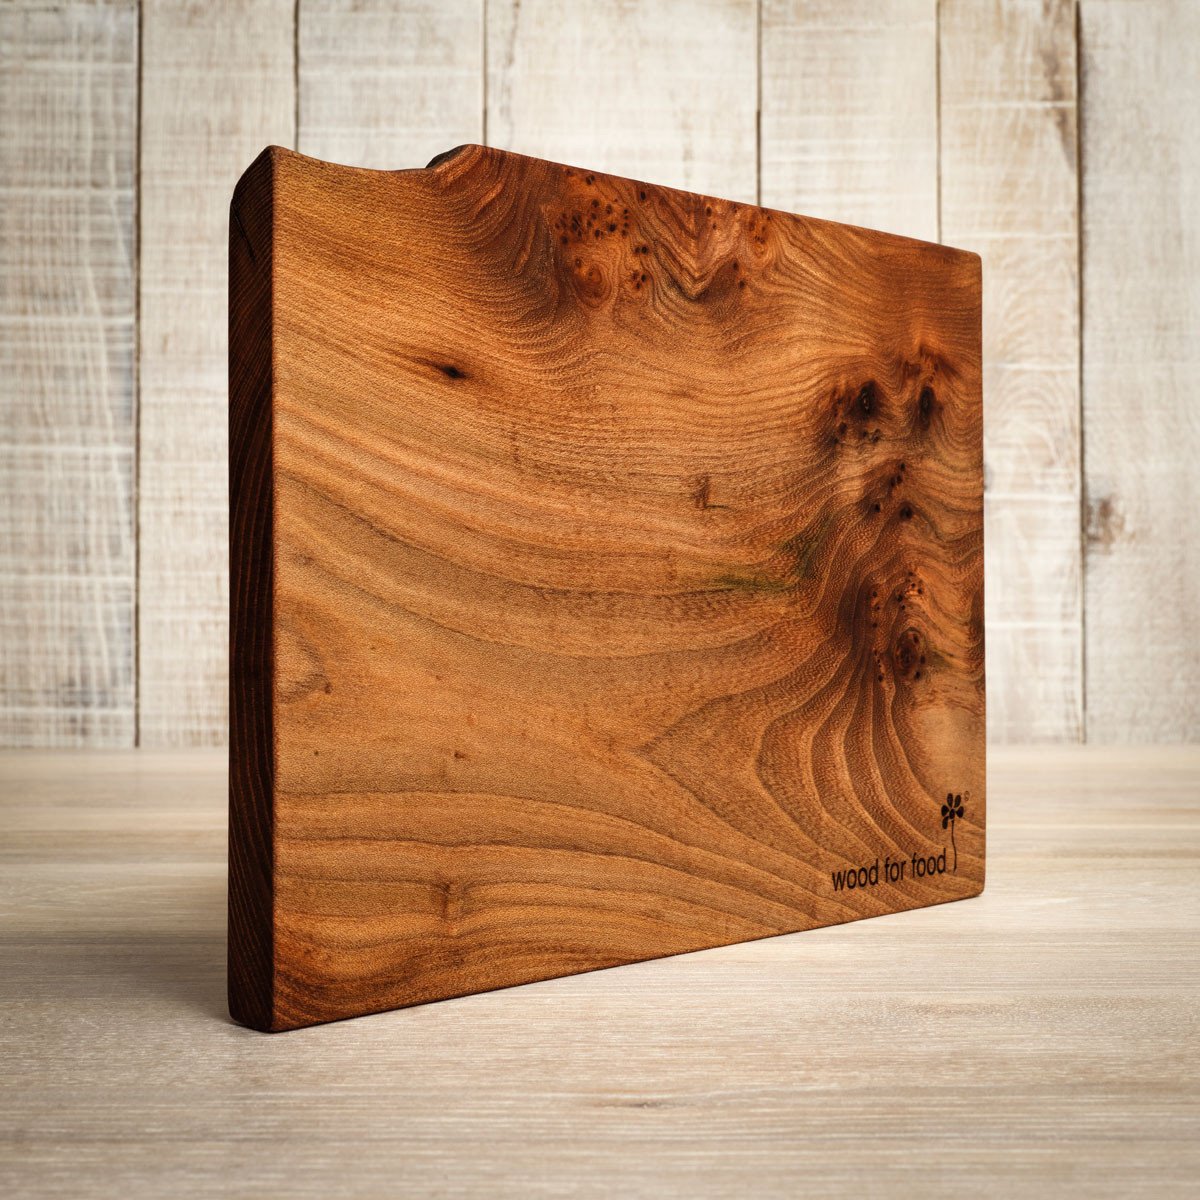 wood for chopping boards